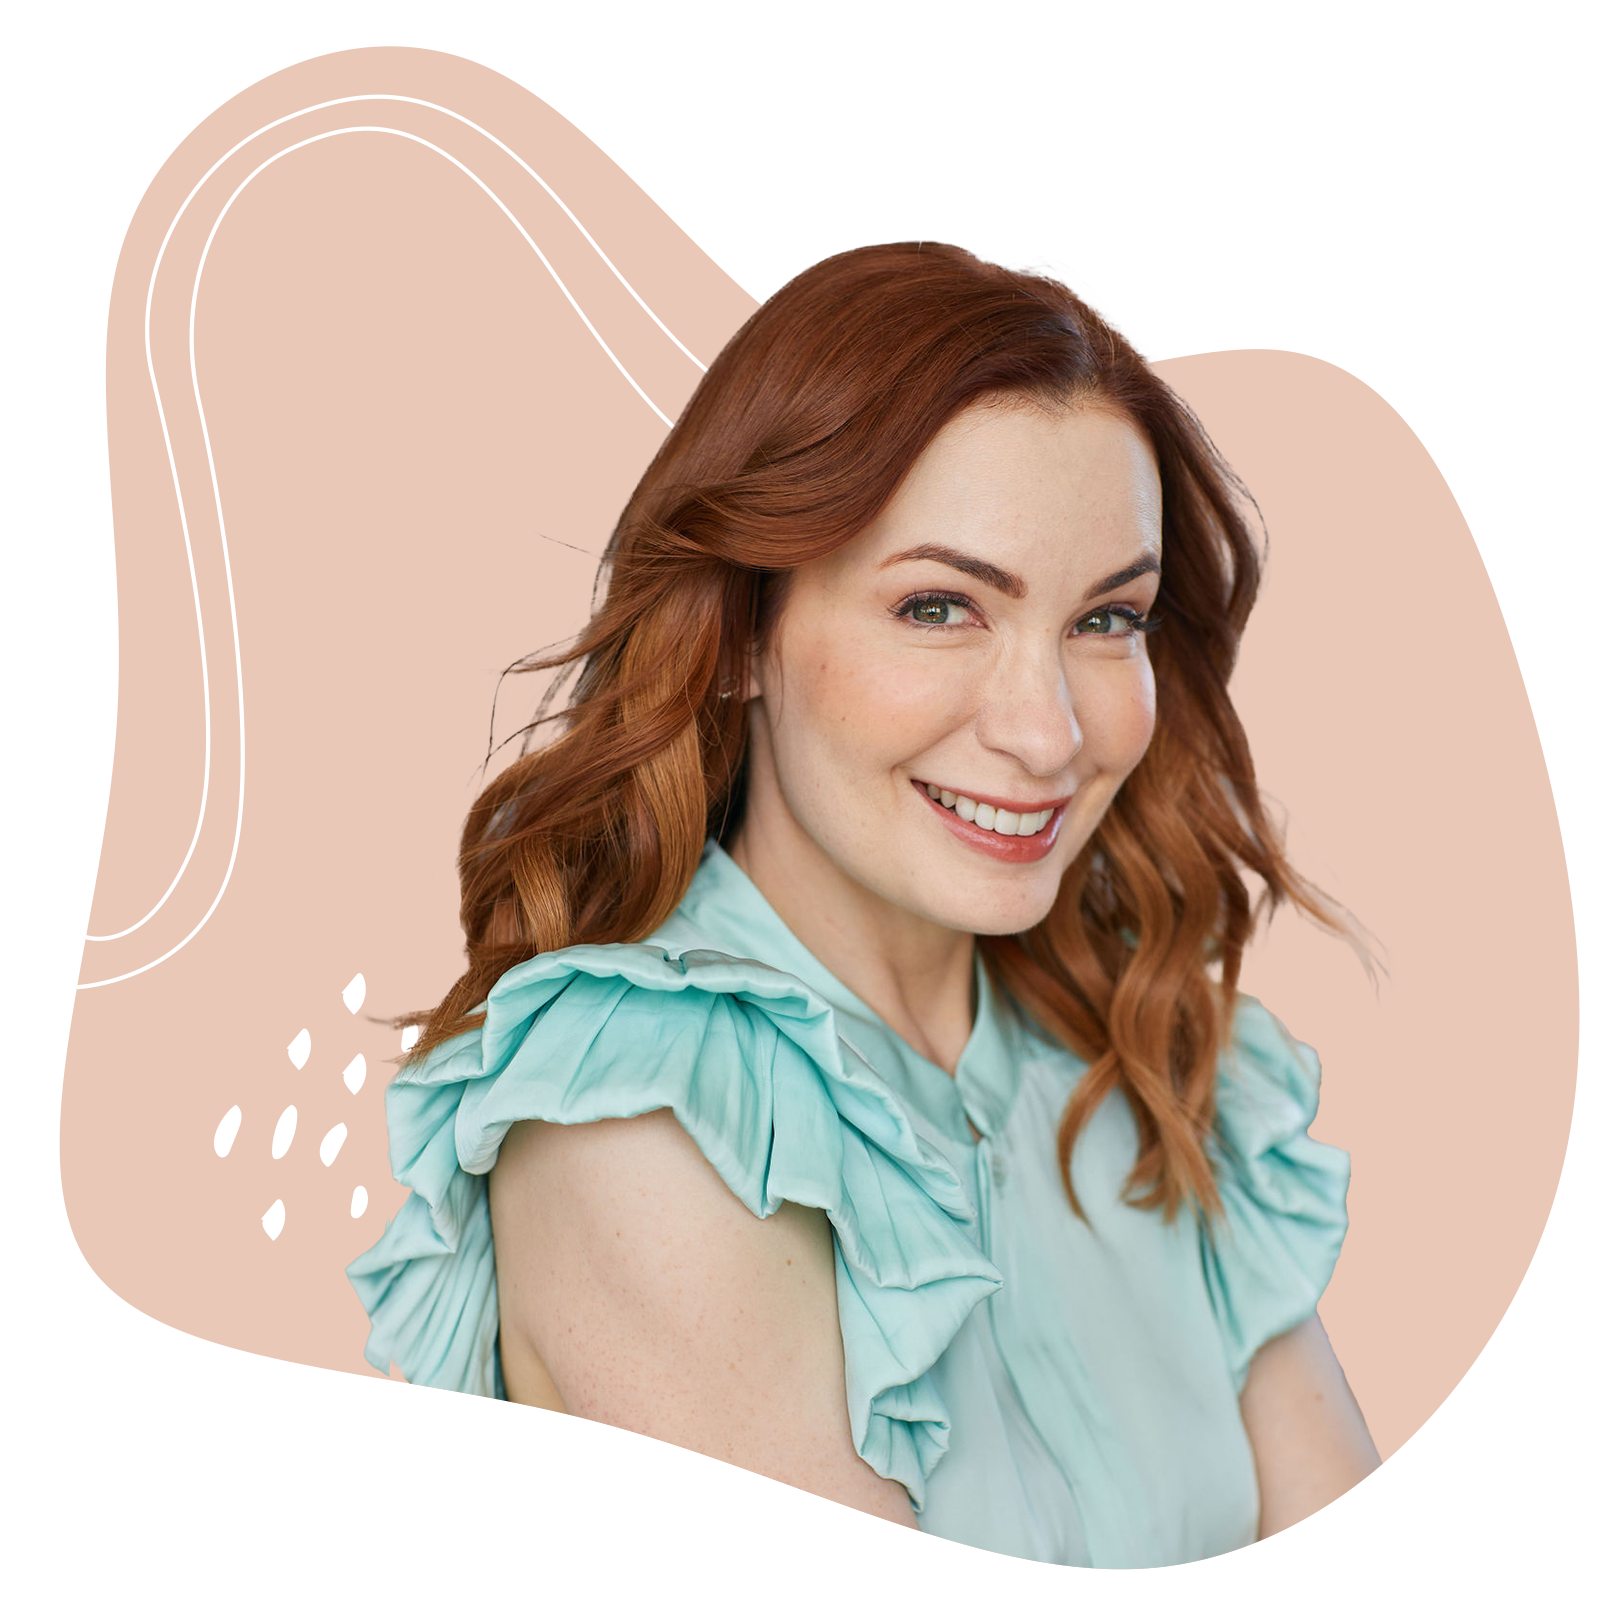 Felicitations from Felicia Day!